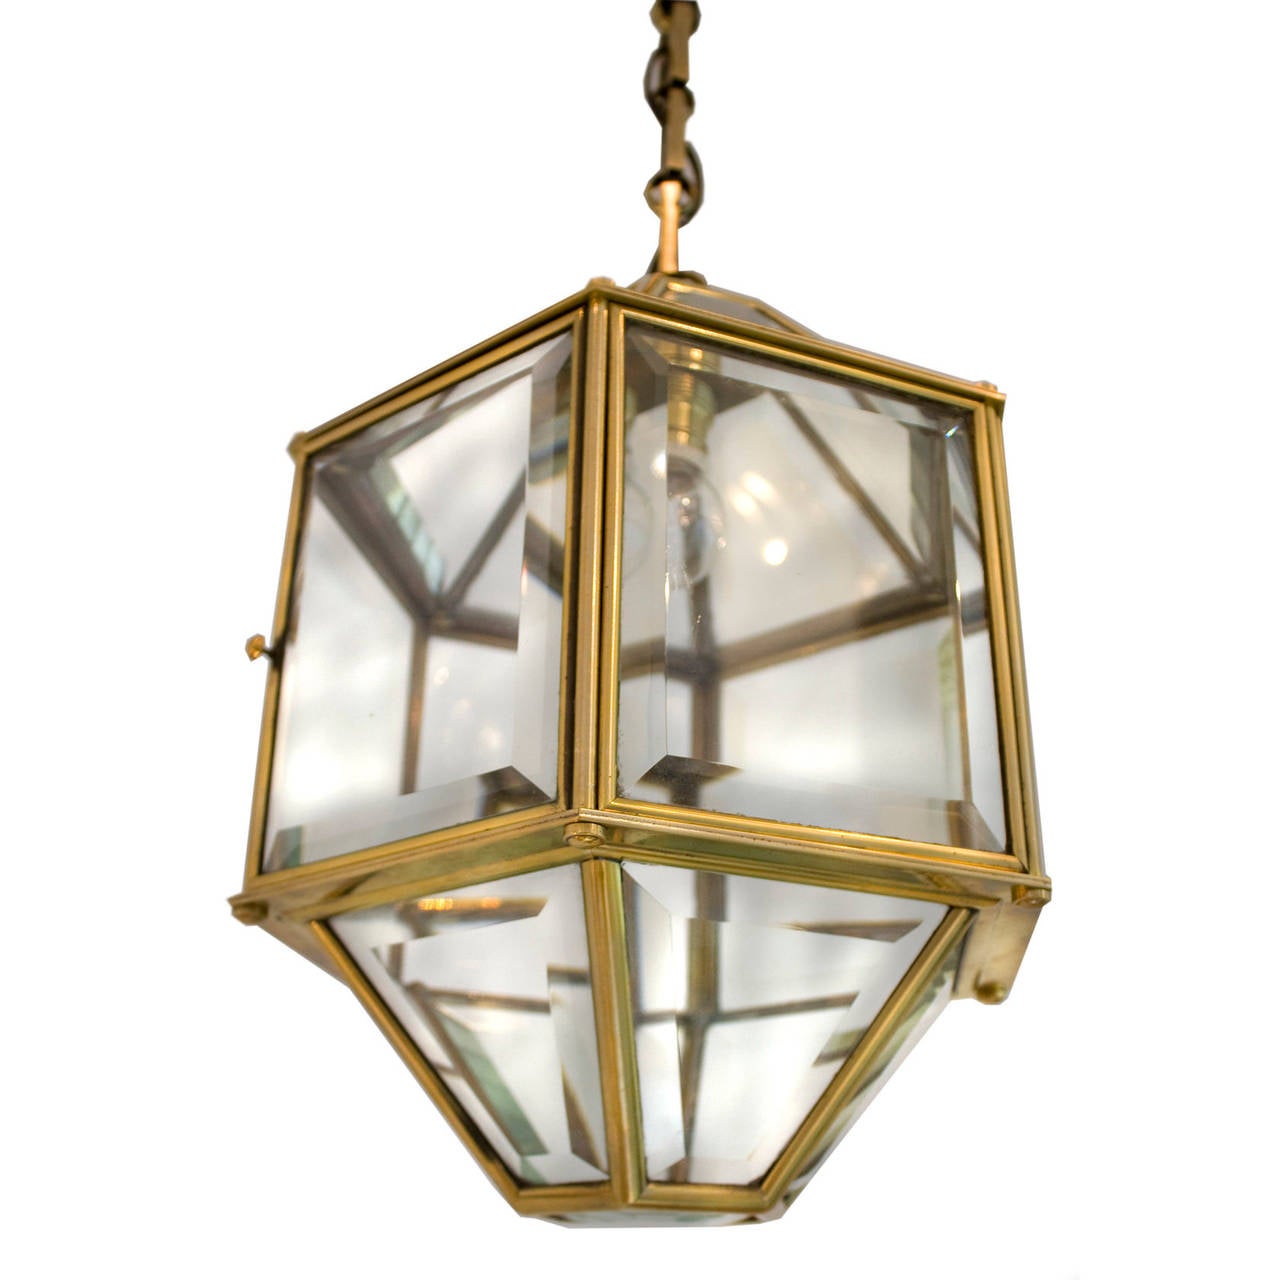 Stylish European brass lamp designed in the Adolf Loos Workshop. Original bevelled glass panels lamp with one square face hinged for opening. Original sleek brass chain, refined rectangular chain links, porcelain socket. Fully wired for standard